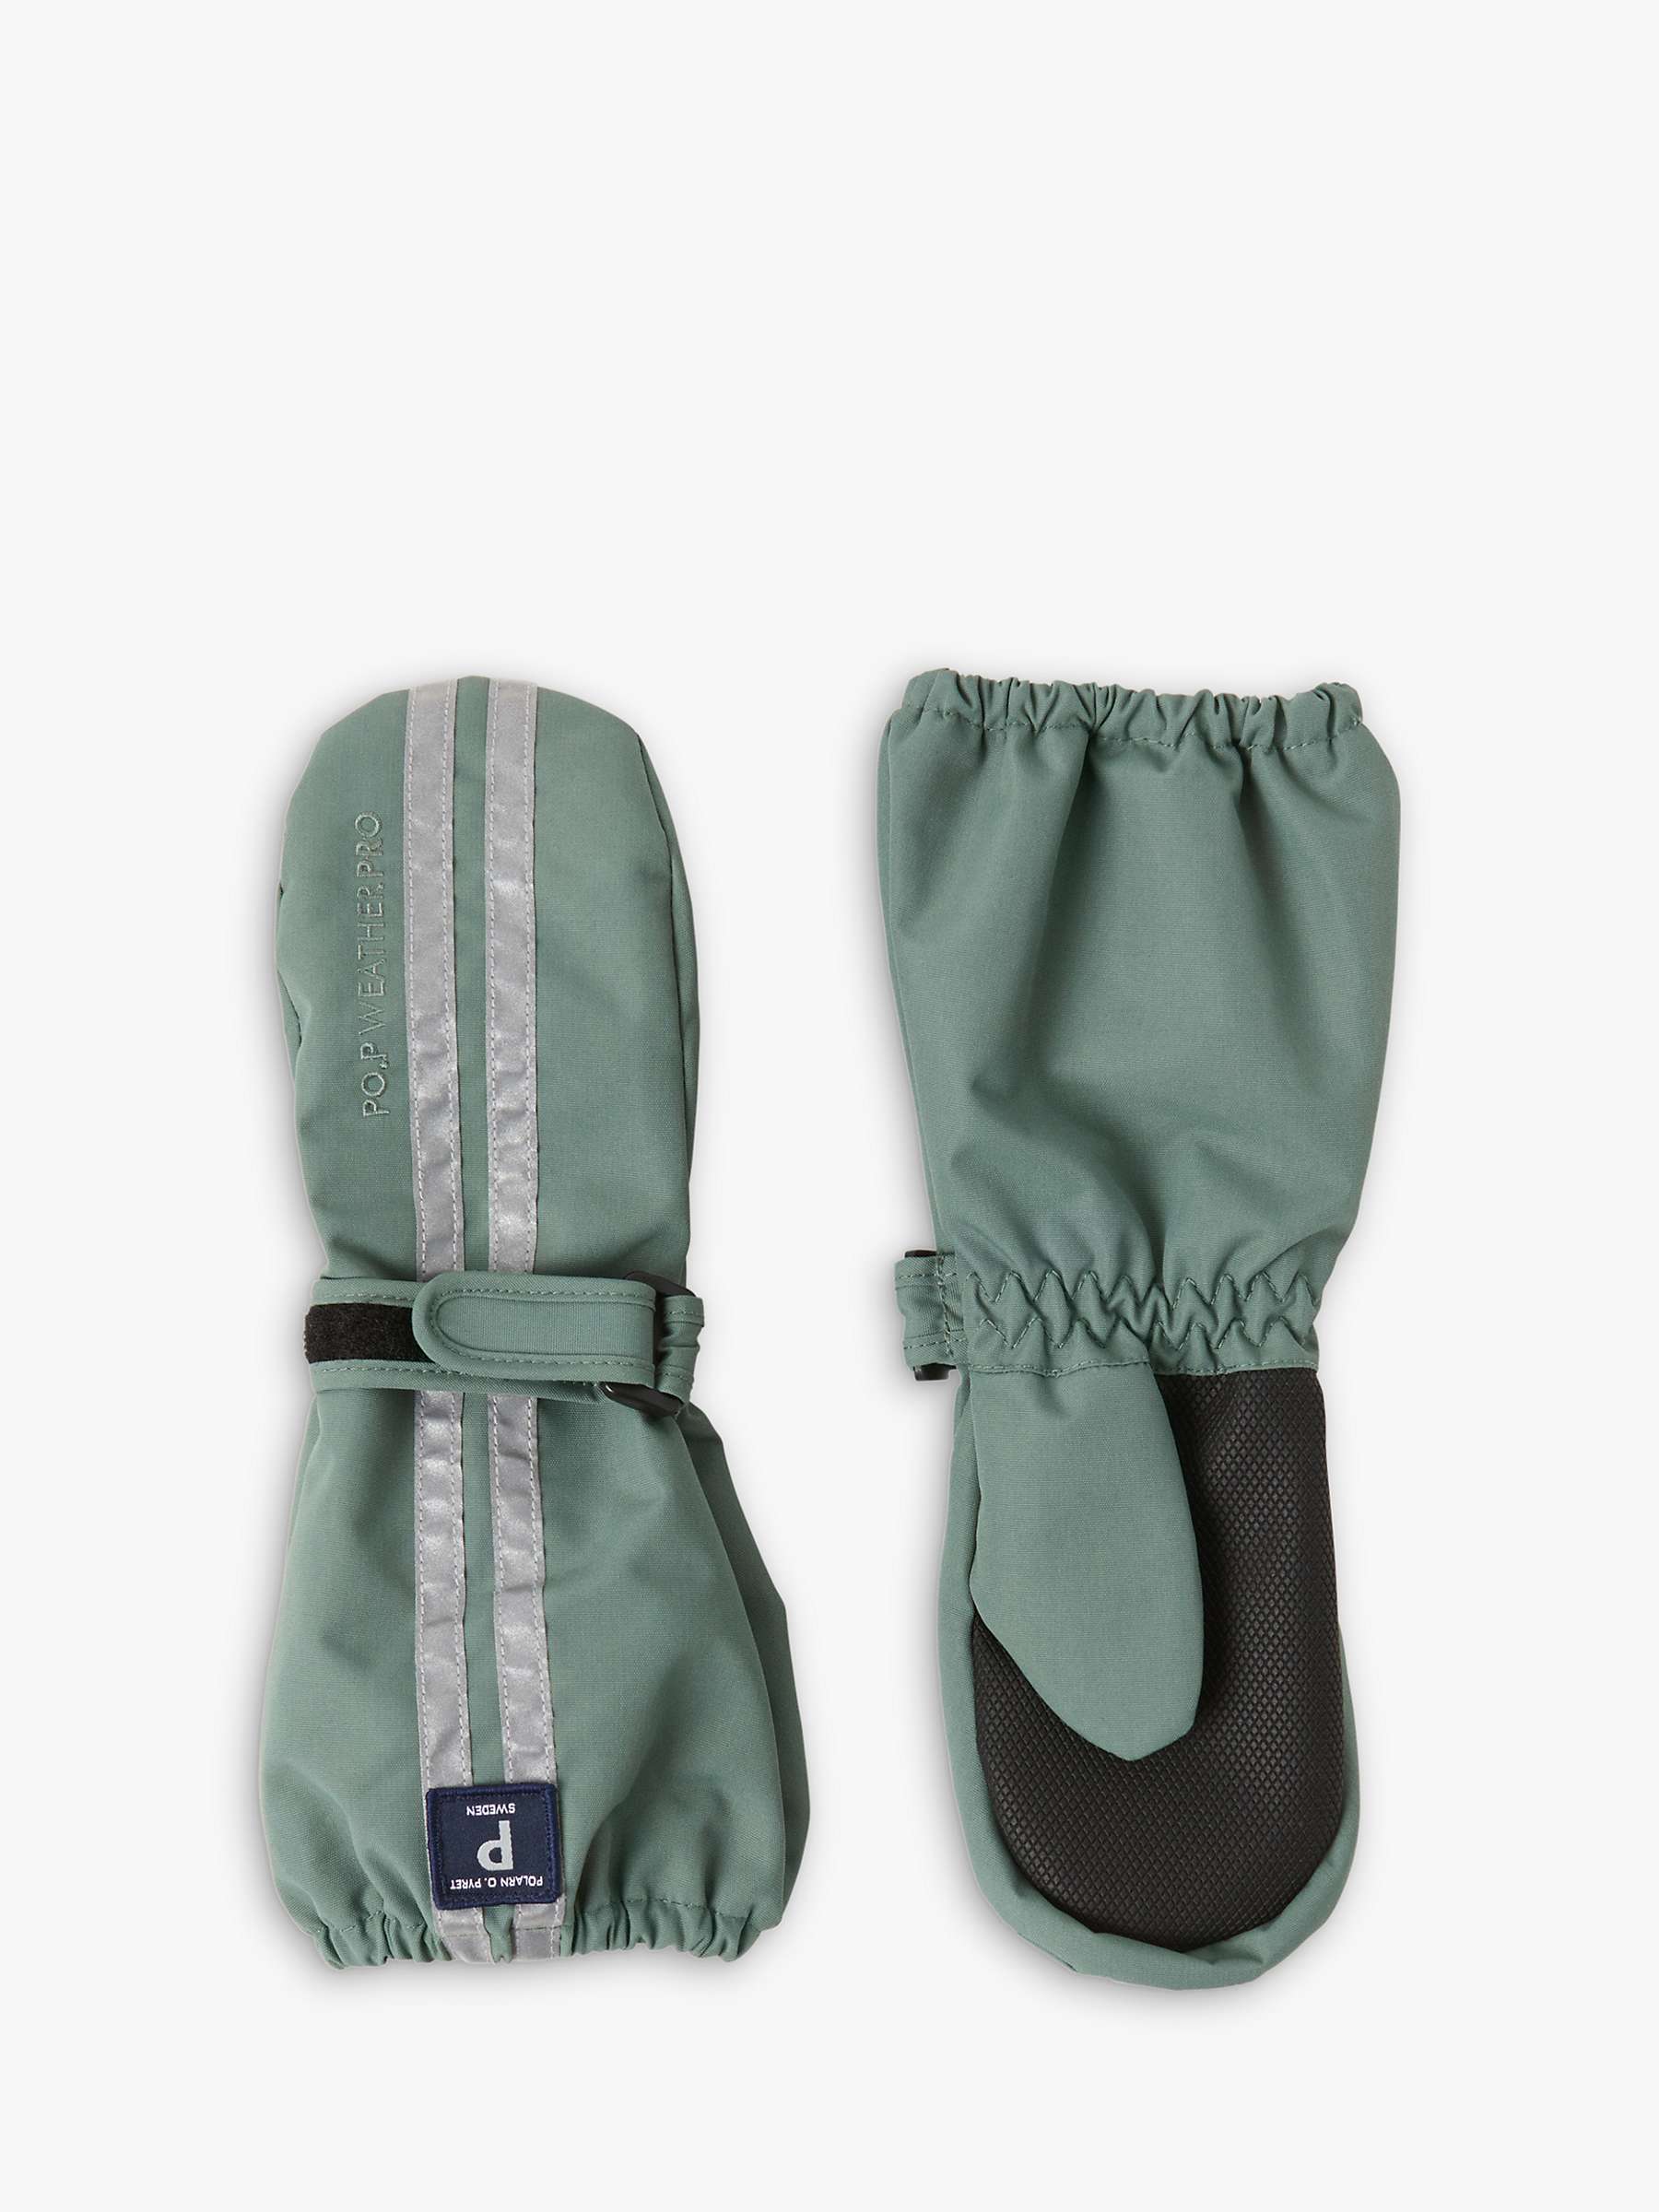 Buy Polarn O. Pyret Kids' Windproof & Waterproof Shell Mittens Online at johnlewis.com